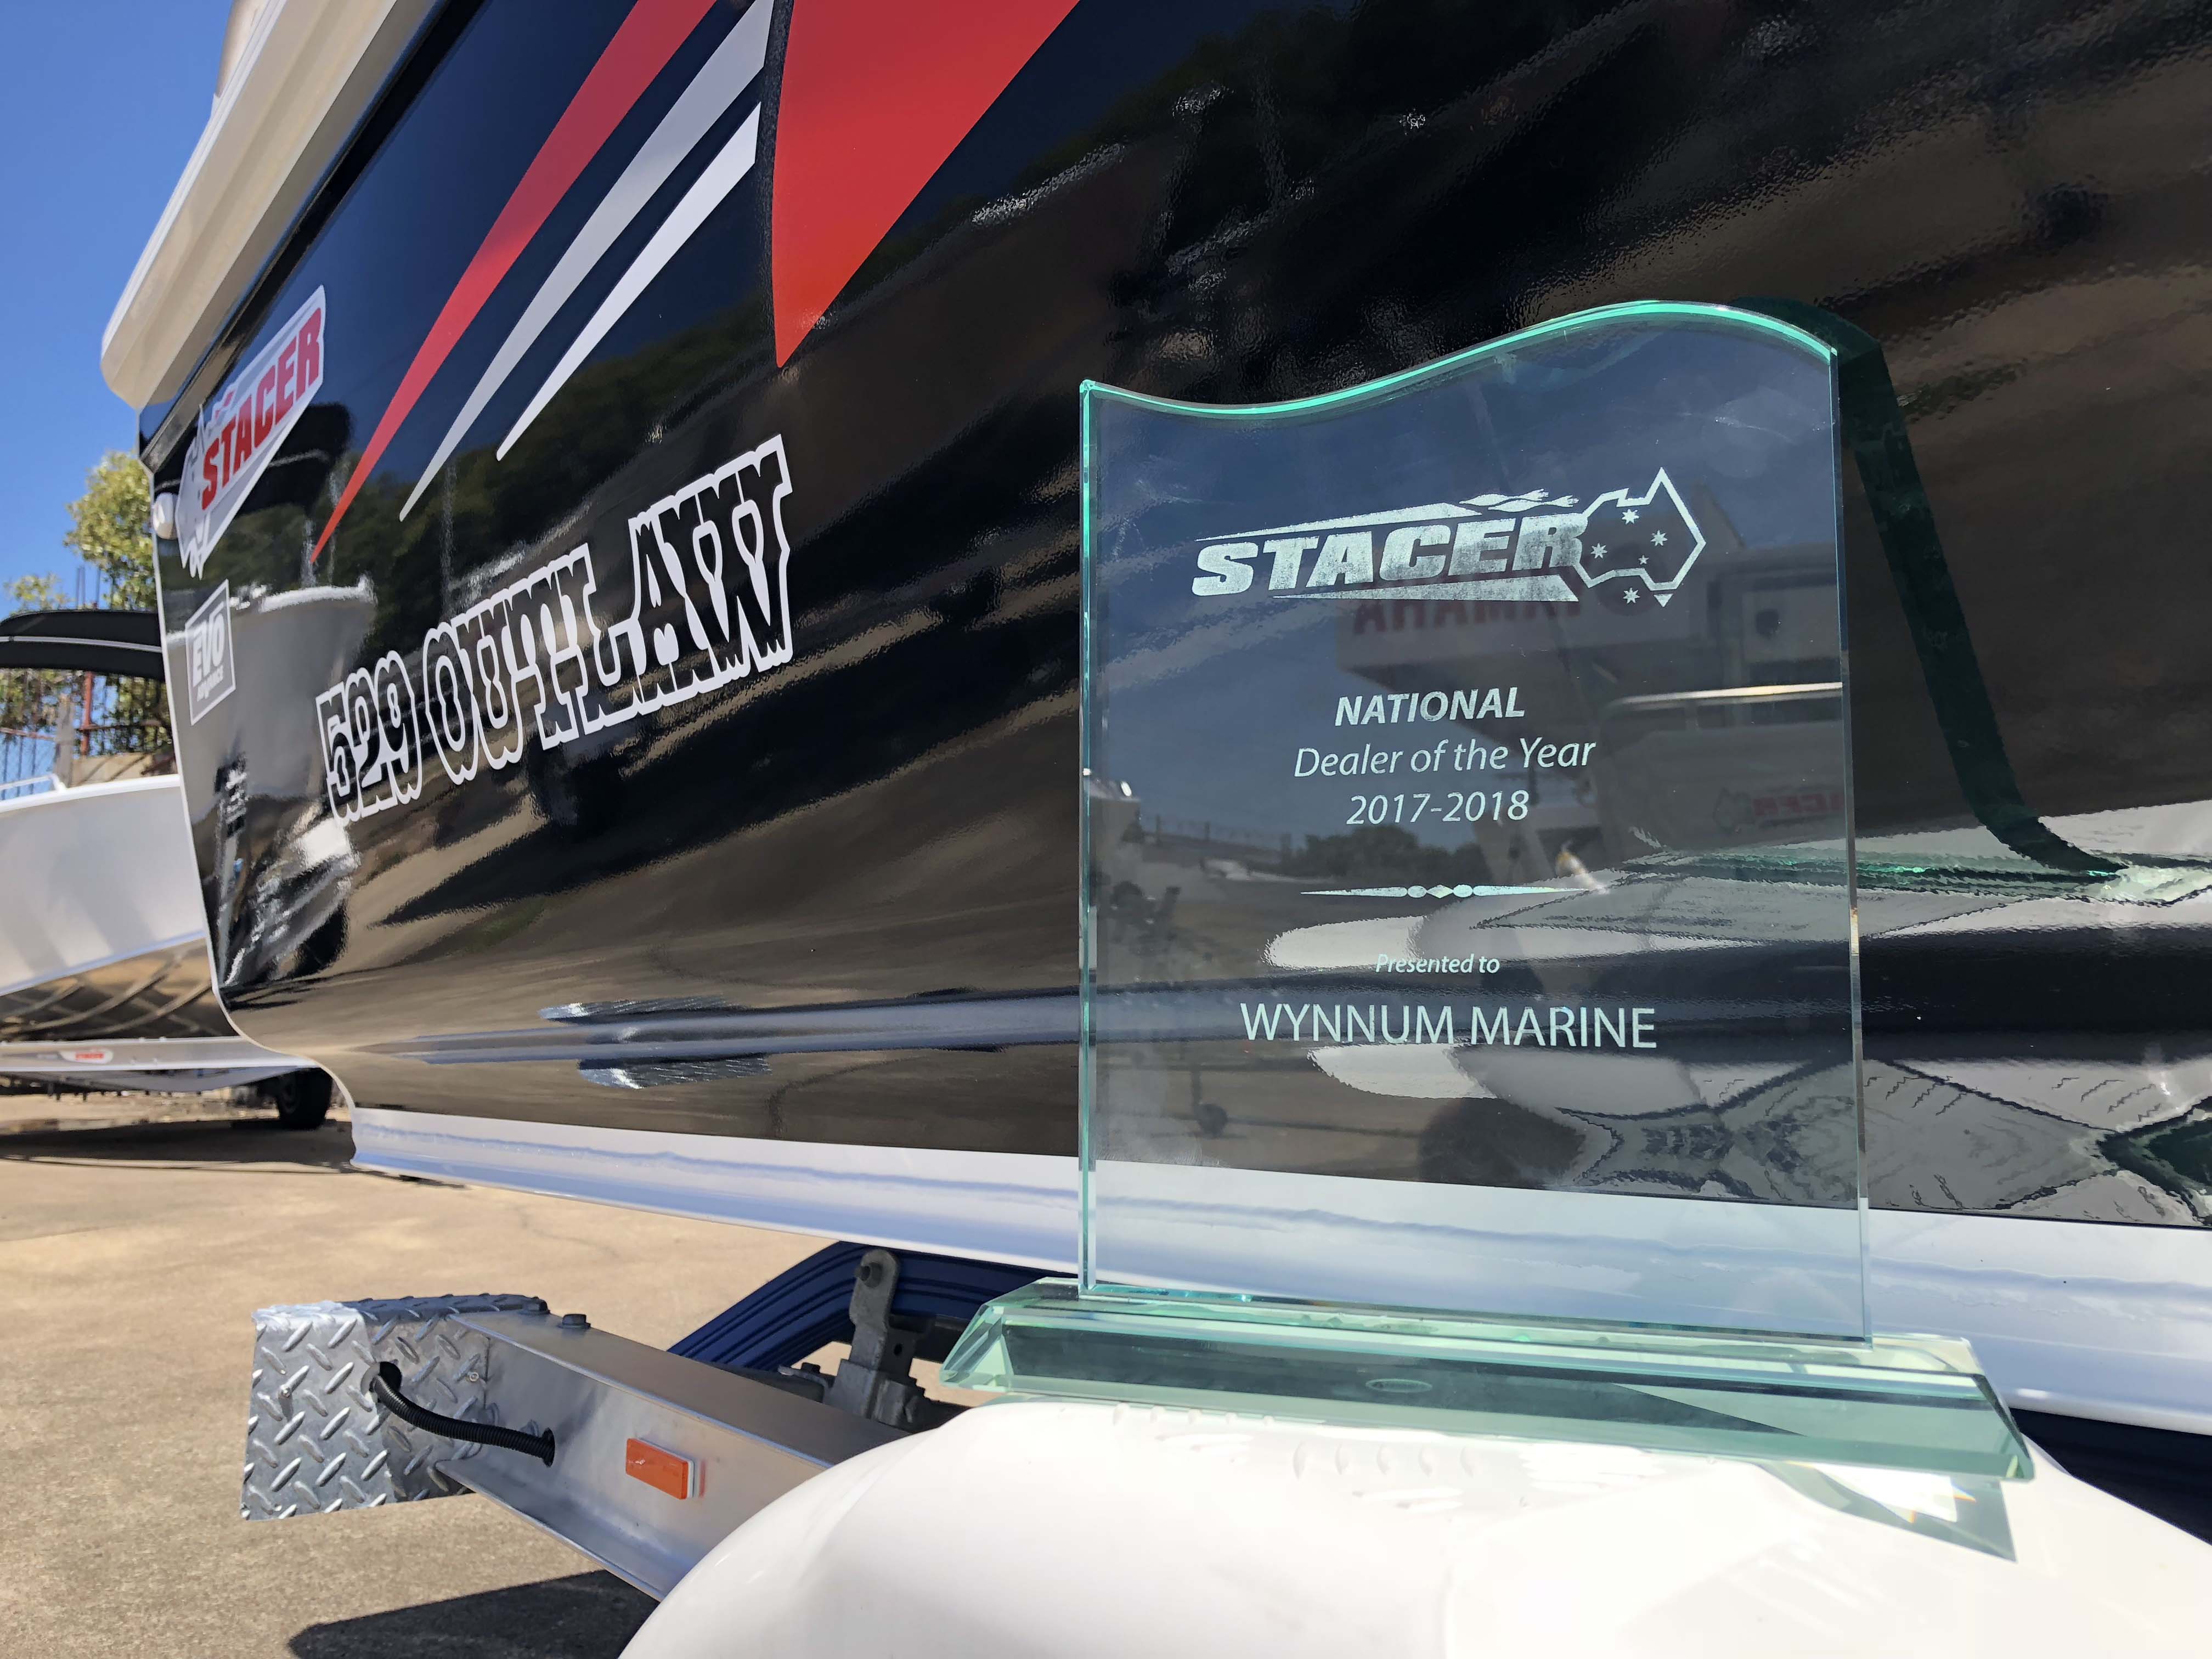 Wynnum Marine Awarded as the Stacer Boats 2017-2018 National Dealer of the Year